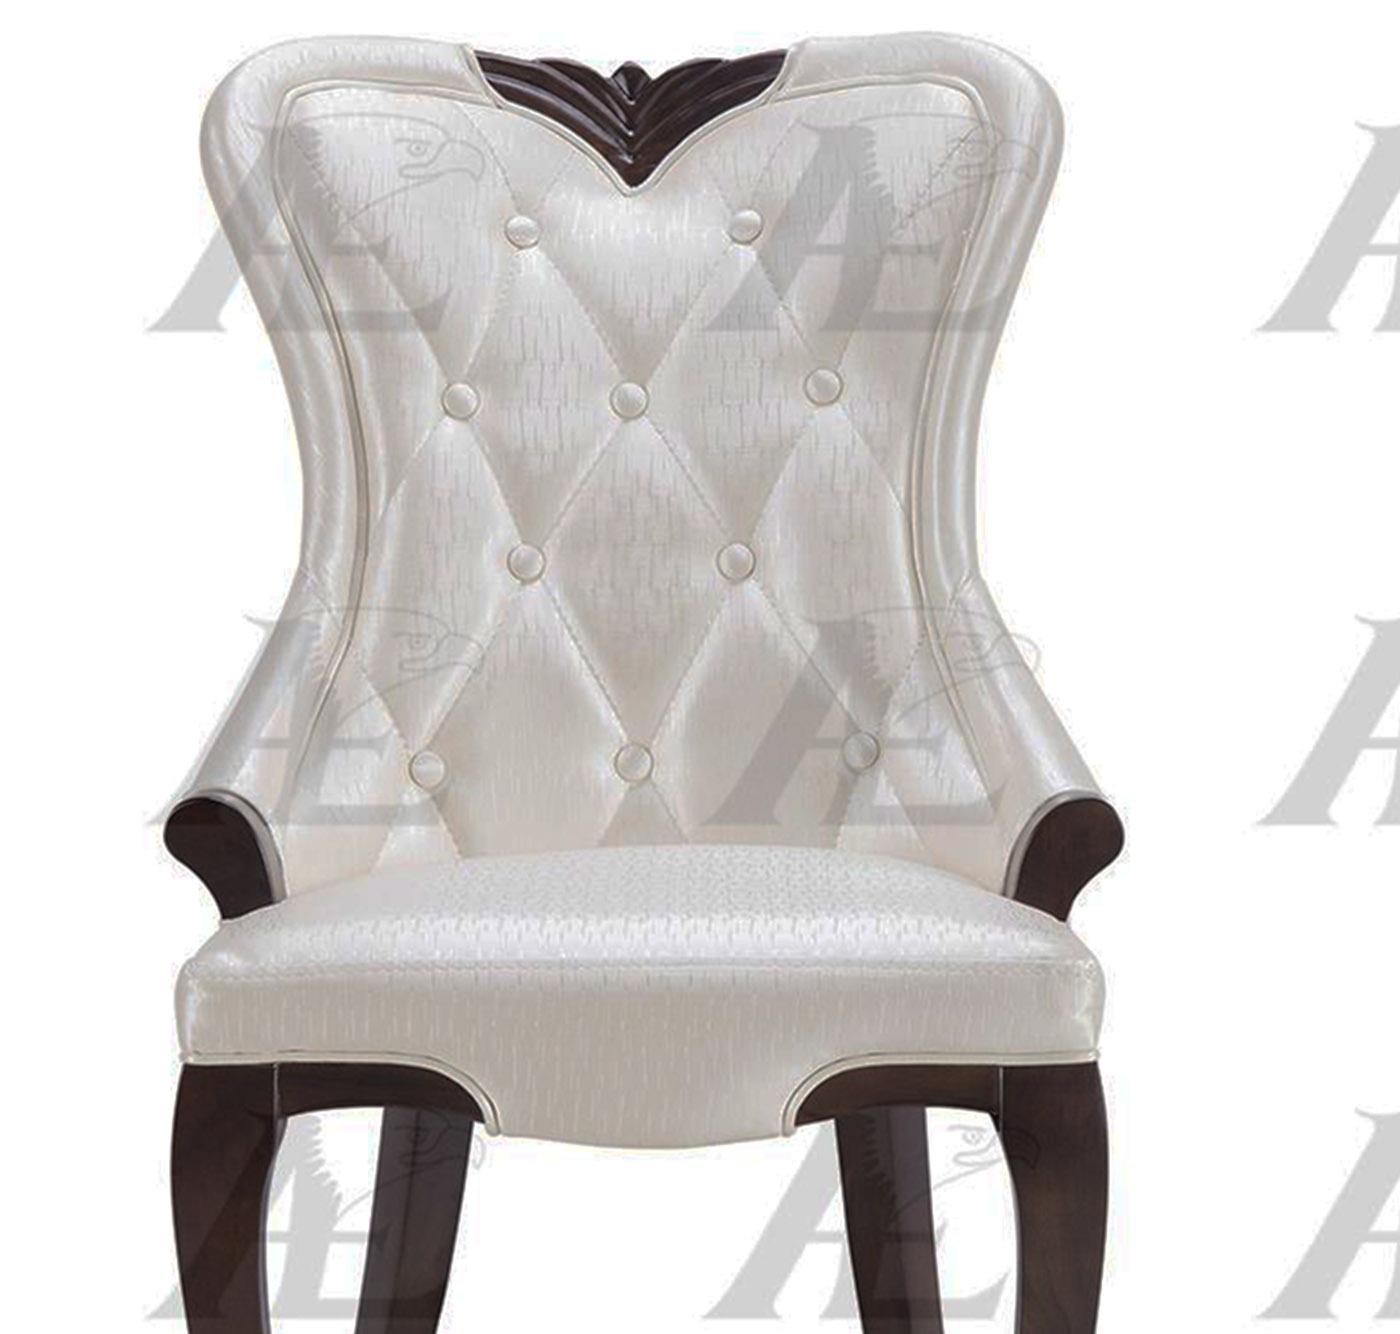 

    
American Eagle Furniture CK-H168-CRM Dining Side Chair Cream CK-H168-CRM
